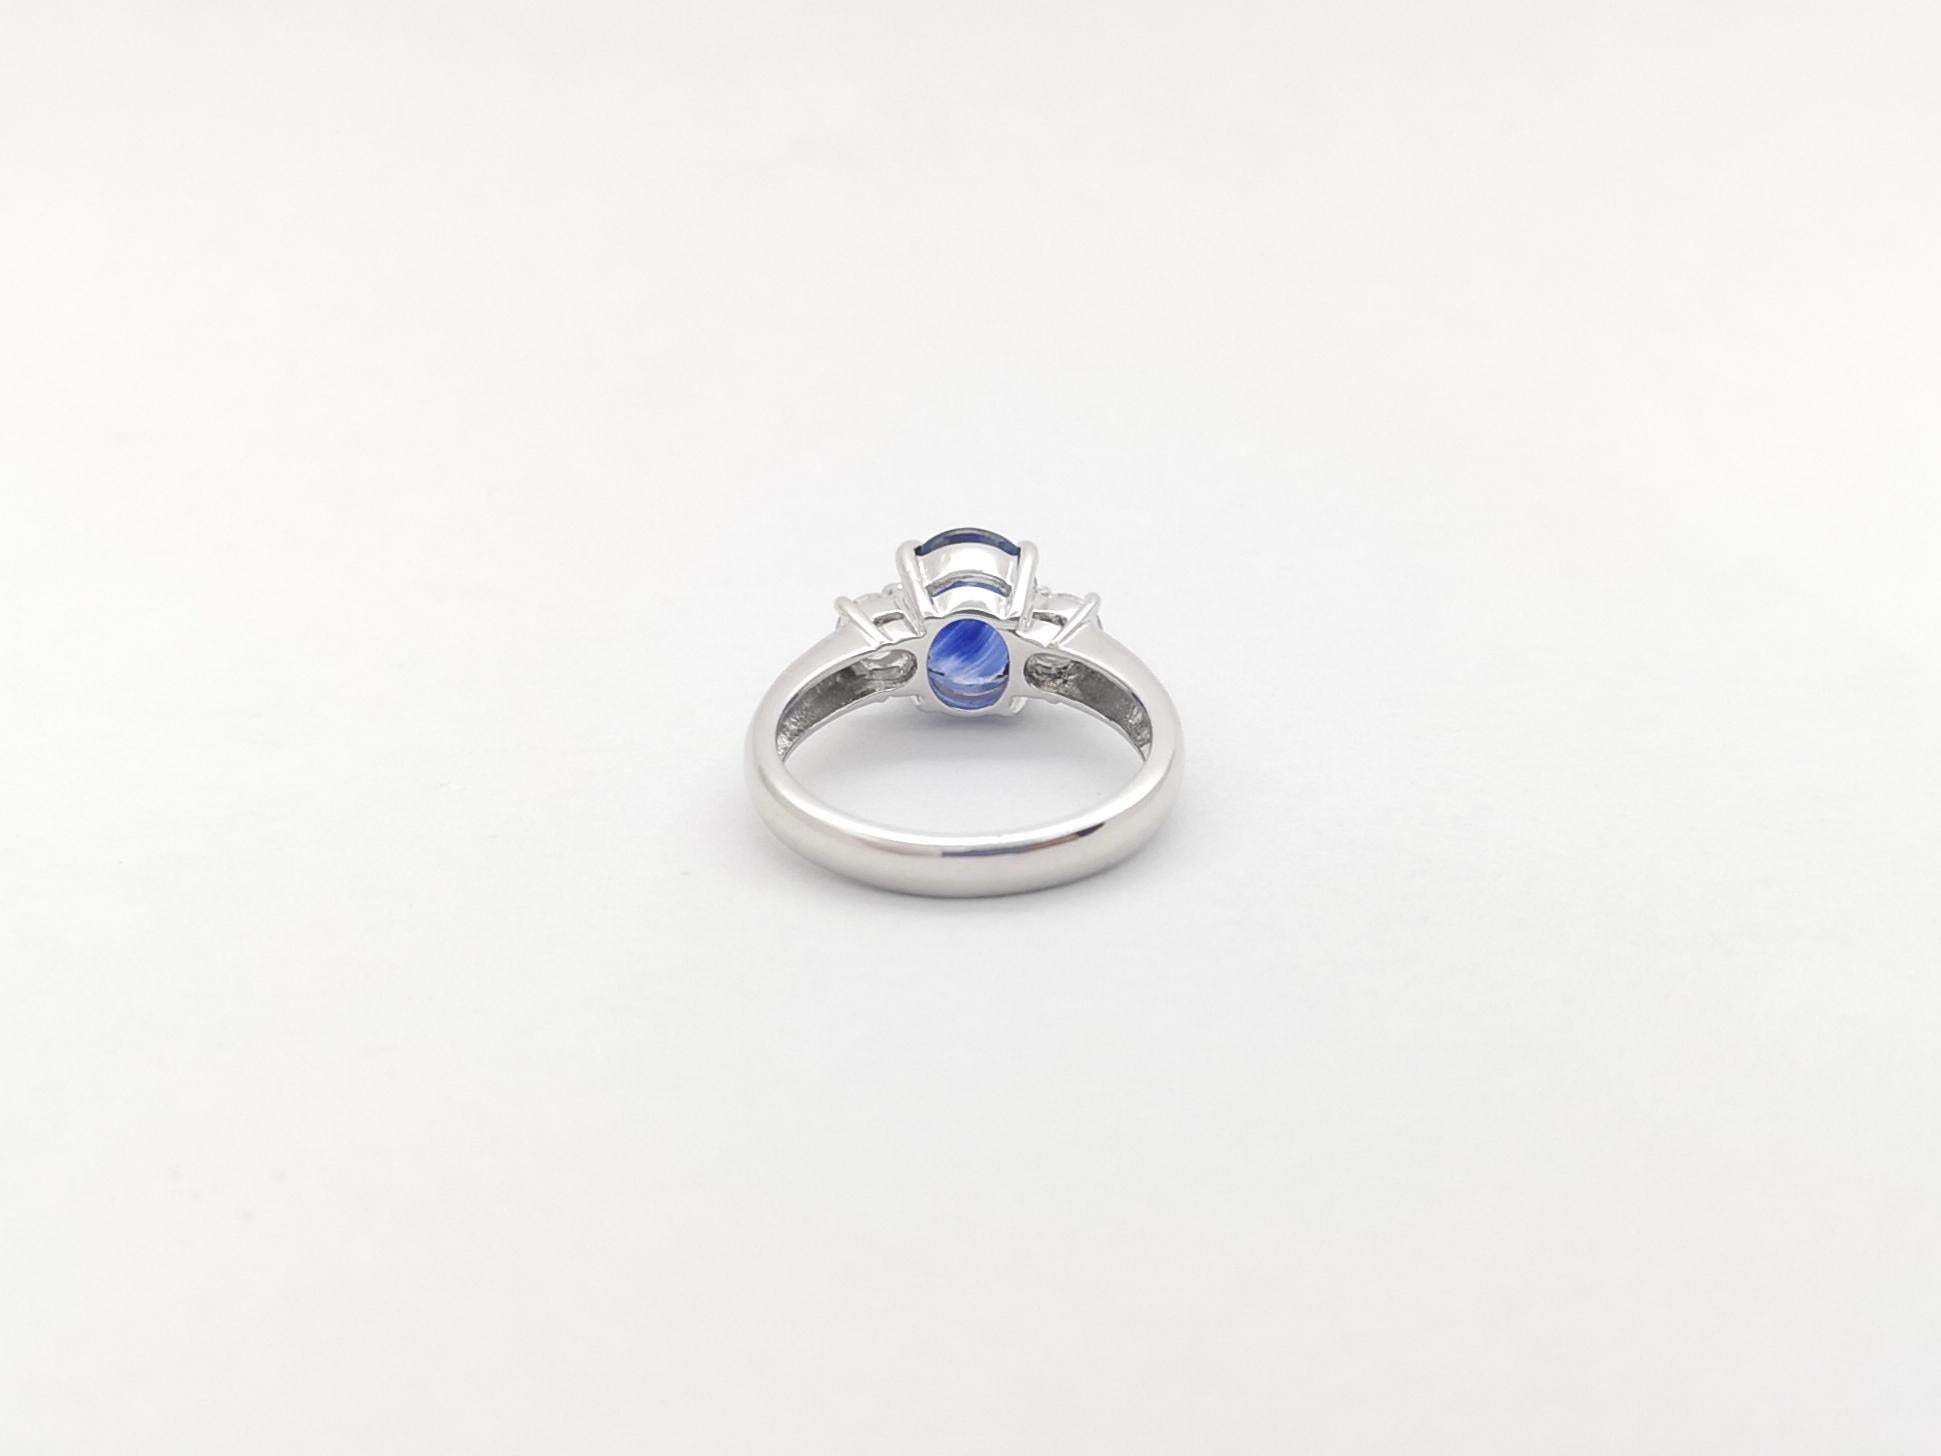 GIA Certified 2.50 cts Blue Sapphire with Diamond Ring set in Platinum 950  For Sale 5